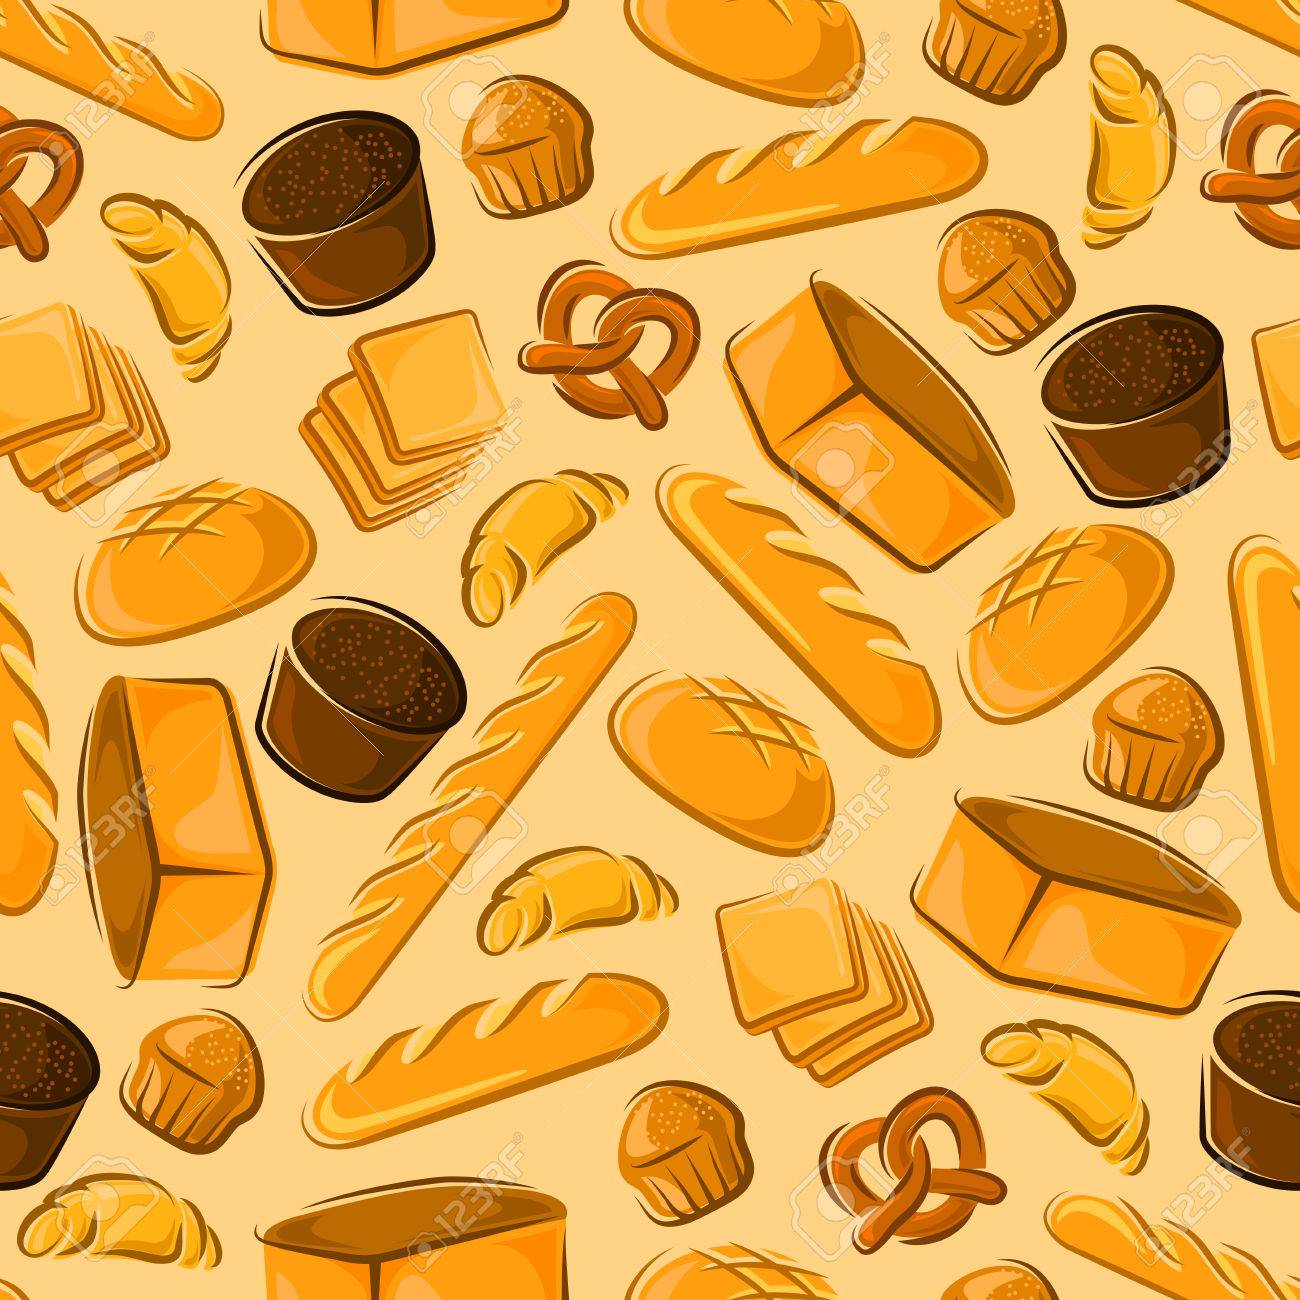 Bakery Products Seamless Background Wallpaper With Vector Pattern